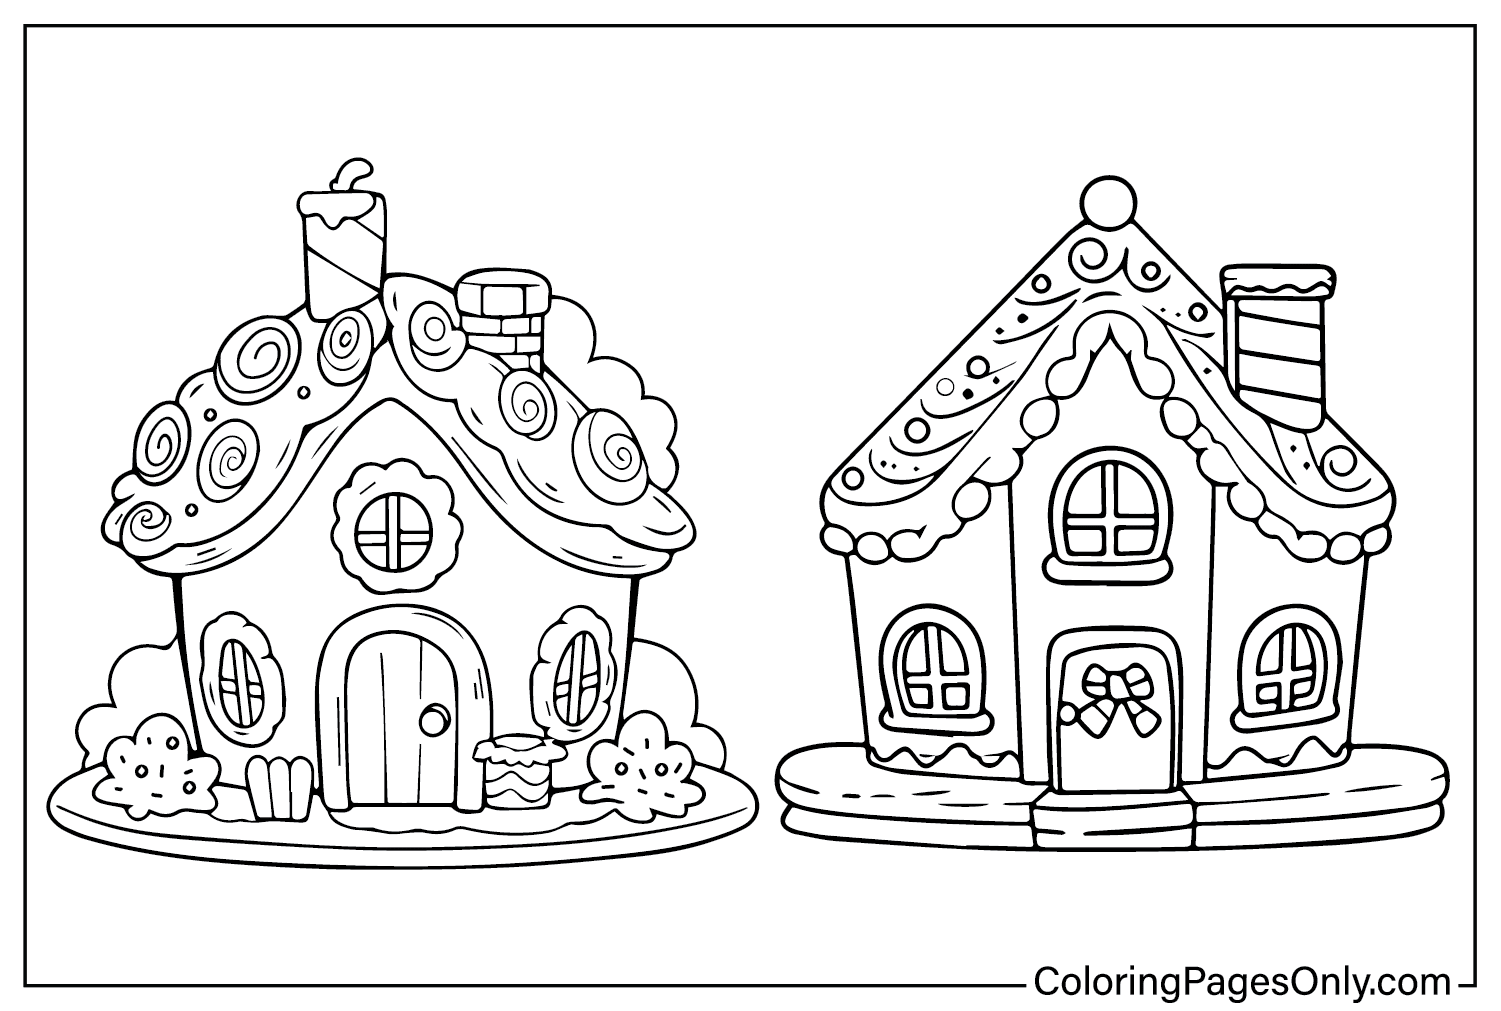 34 Free Printable Gingerbread House Coloring Pages